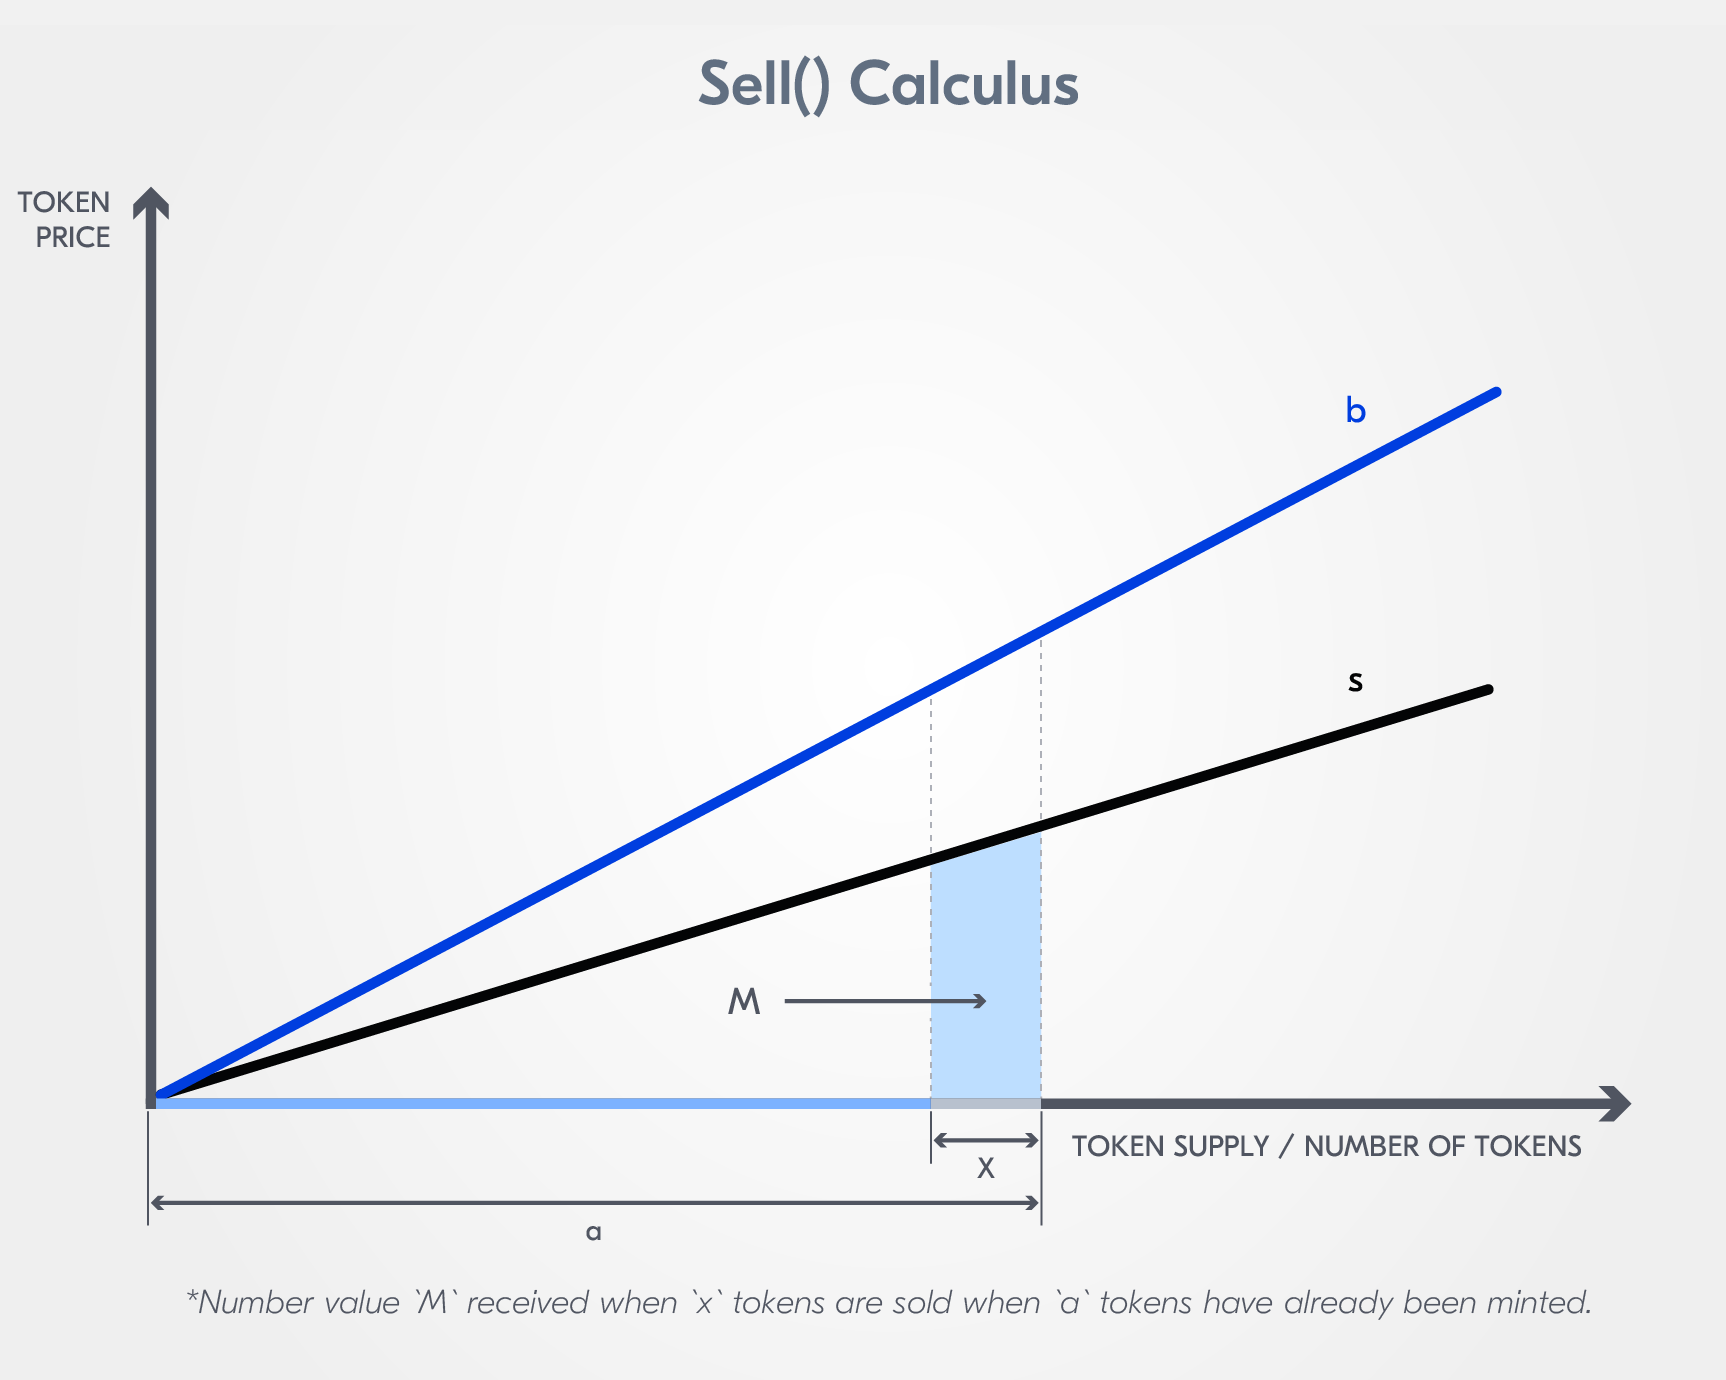 Calculating the sell price post-MFG